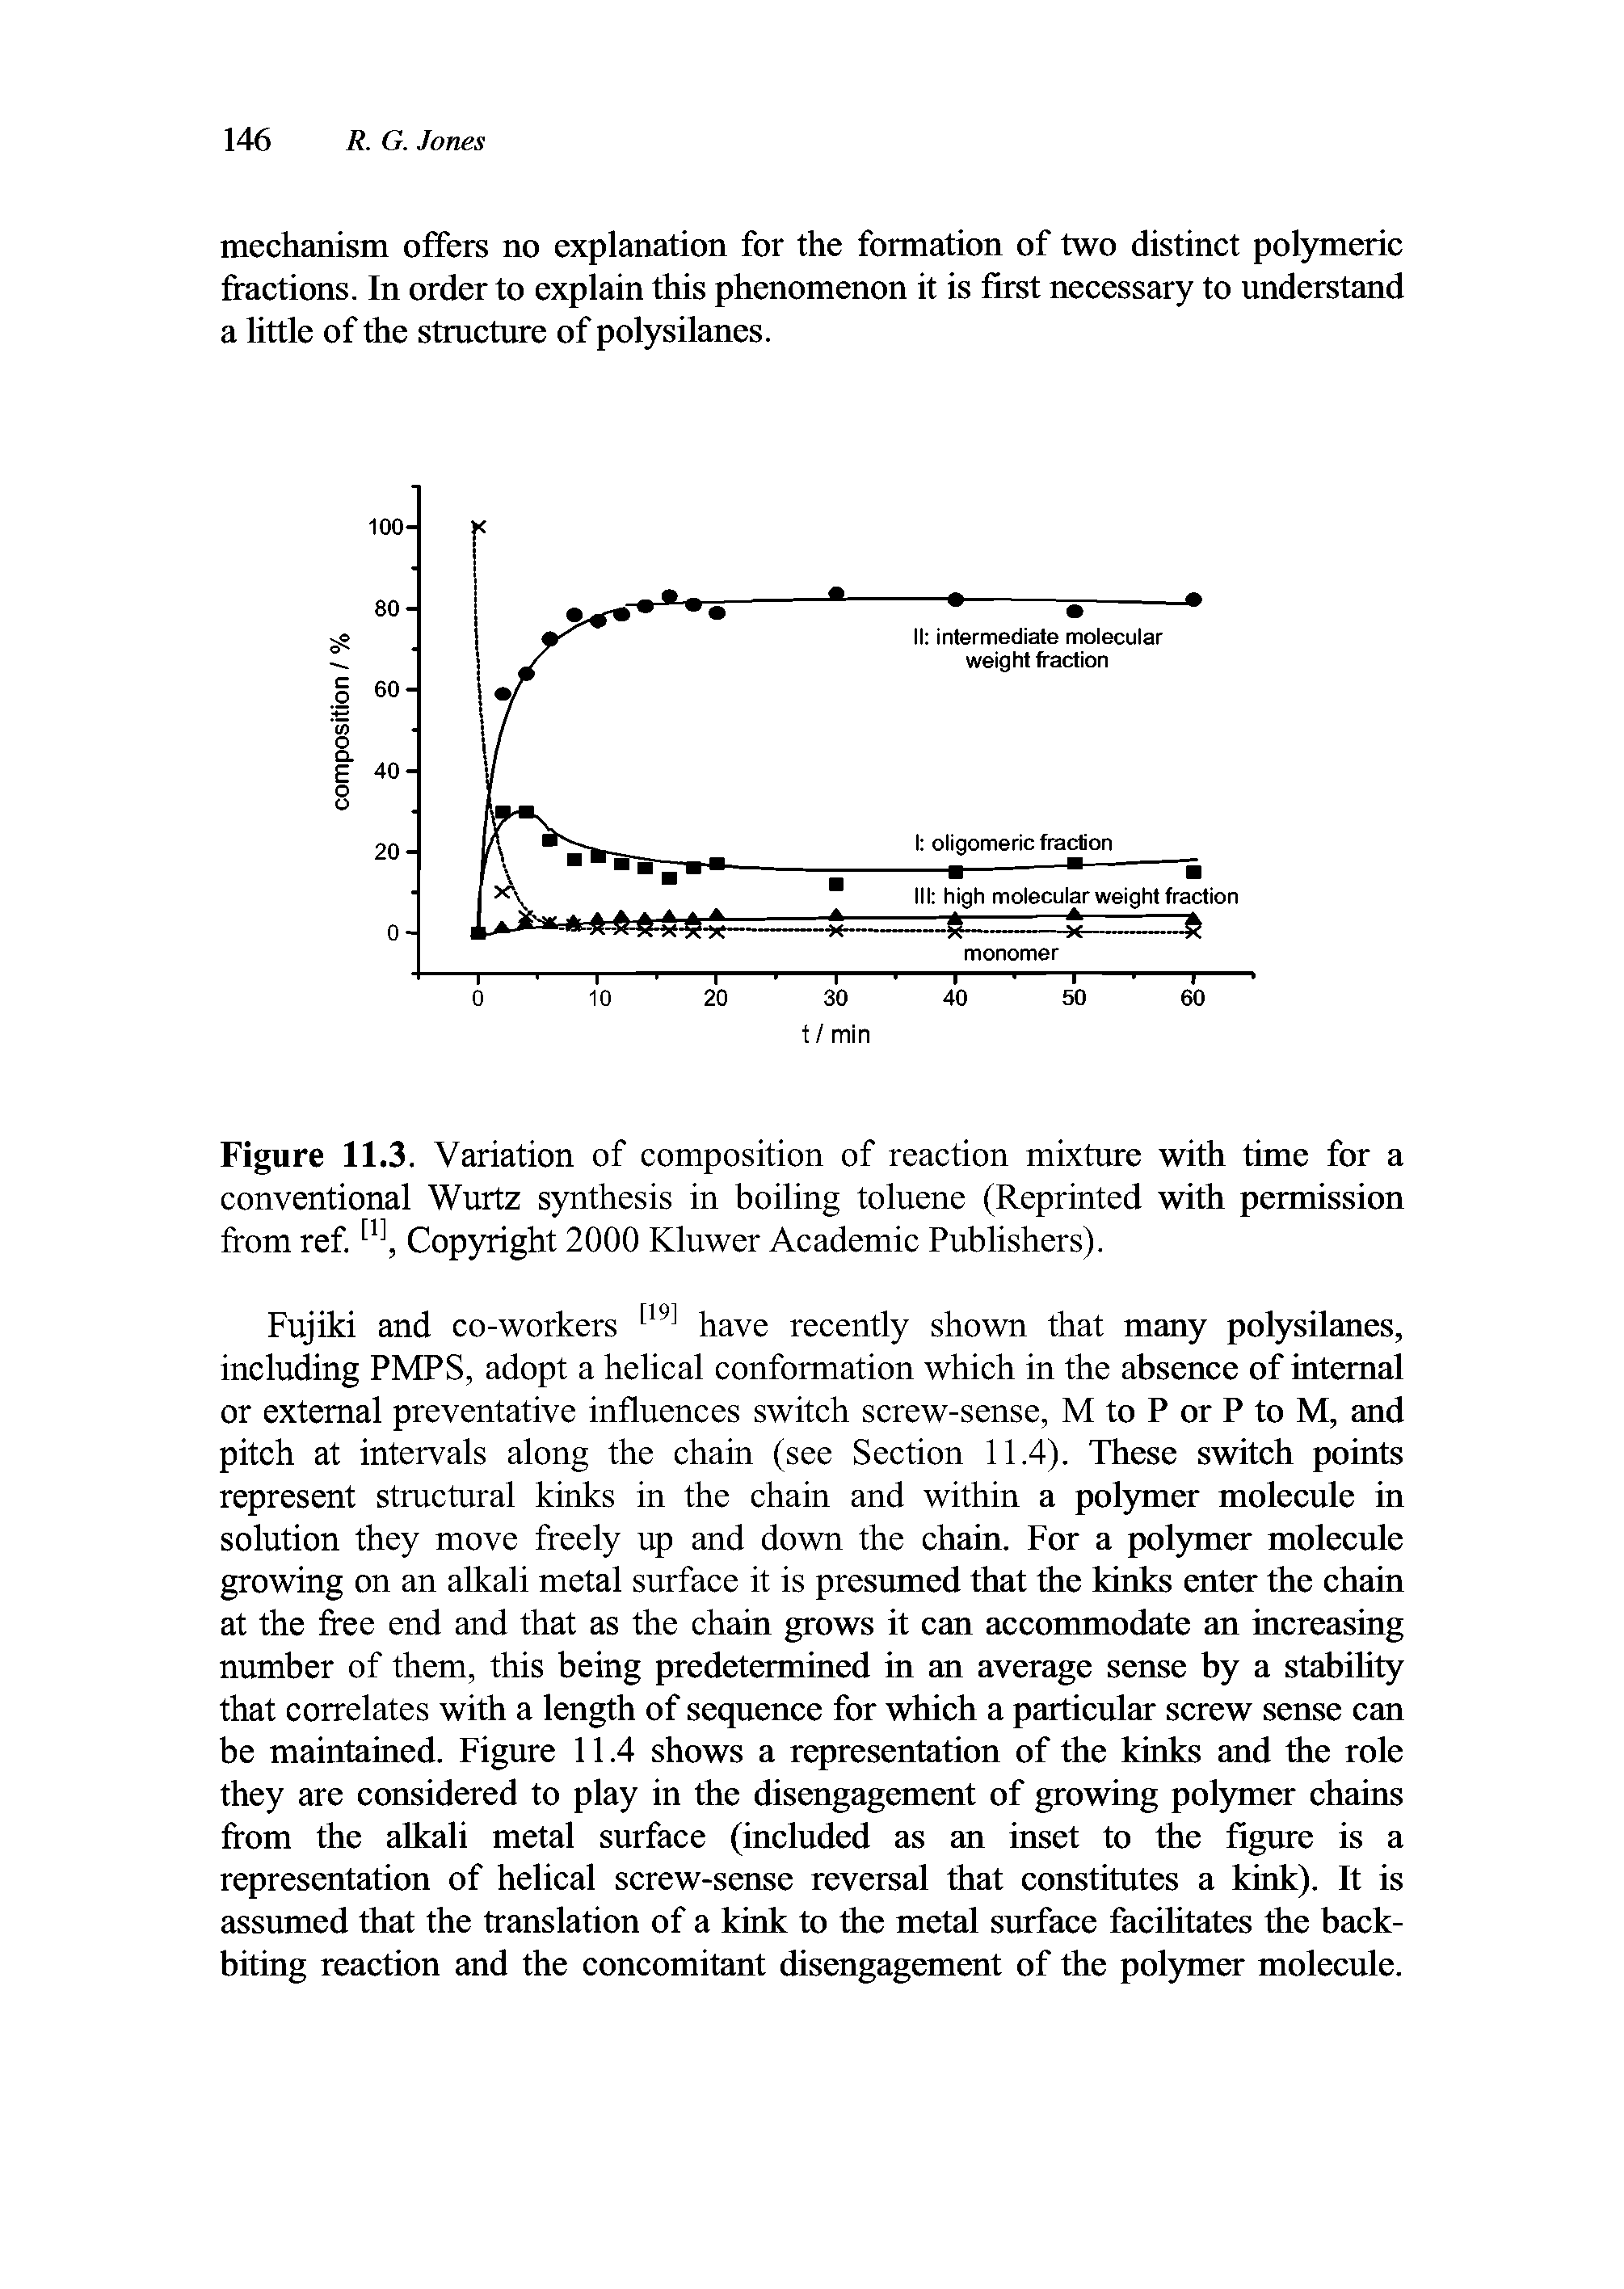 Figure 11.3. Variation of composition of reaction mixture with time for a conventional Wurtz synthesis in boiling toluene (Reprinted with permission from ref Copyright 2000 Kluwer Academic Publishers).